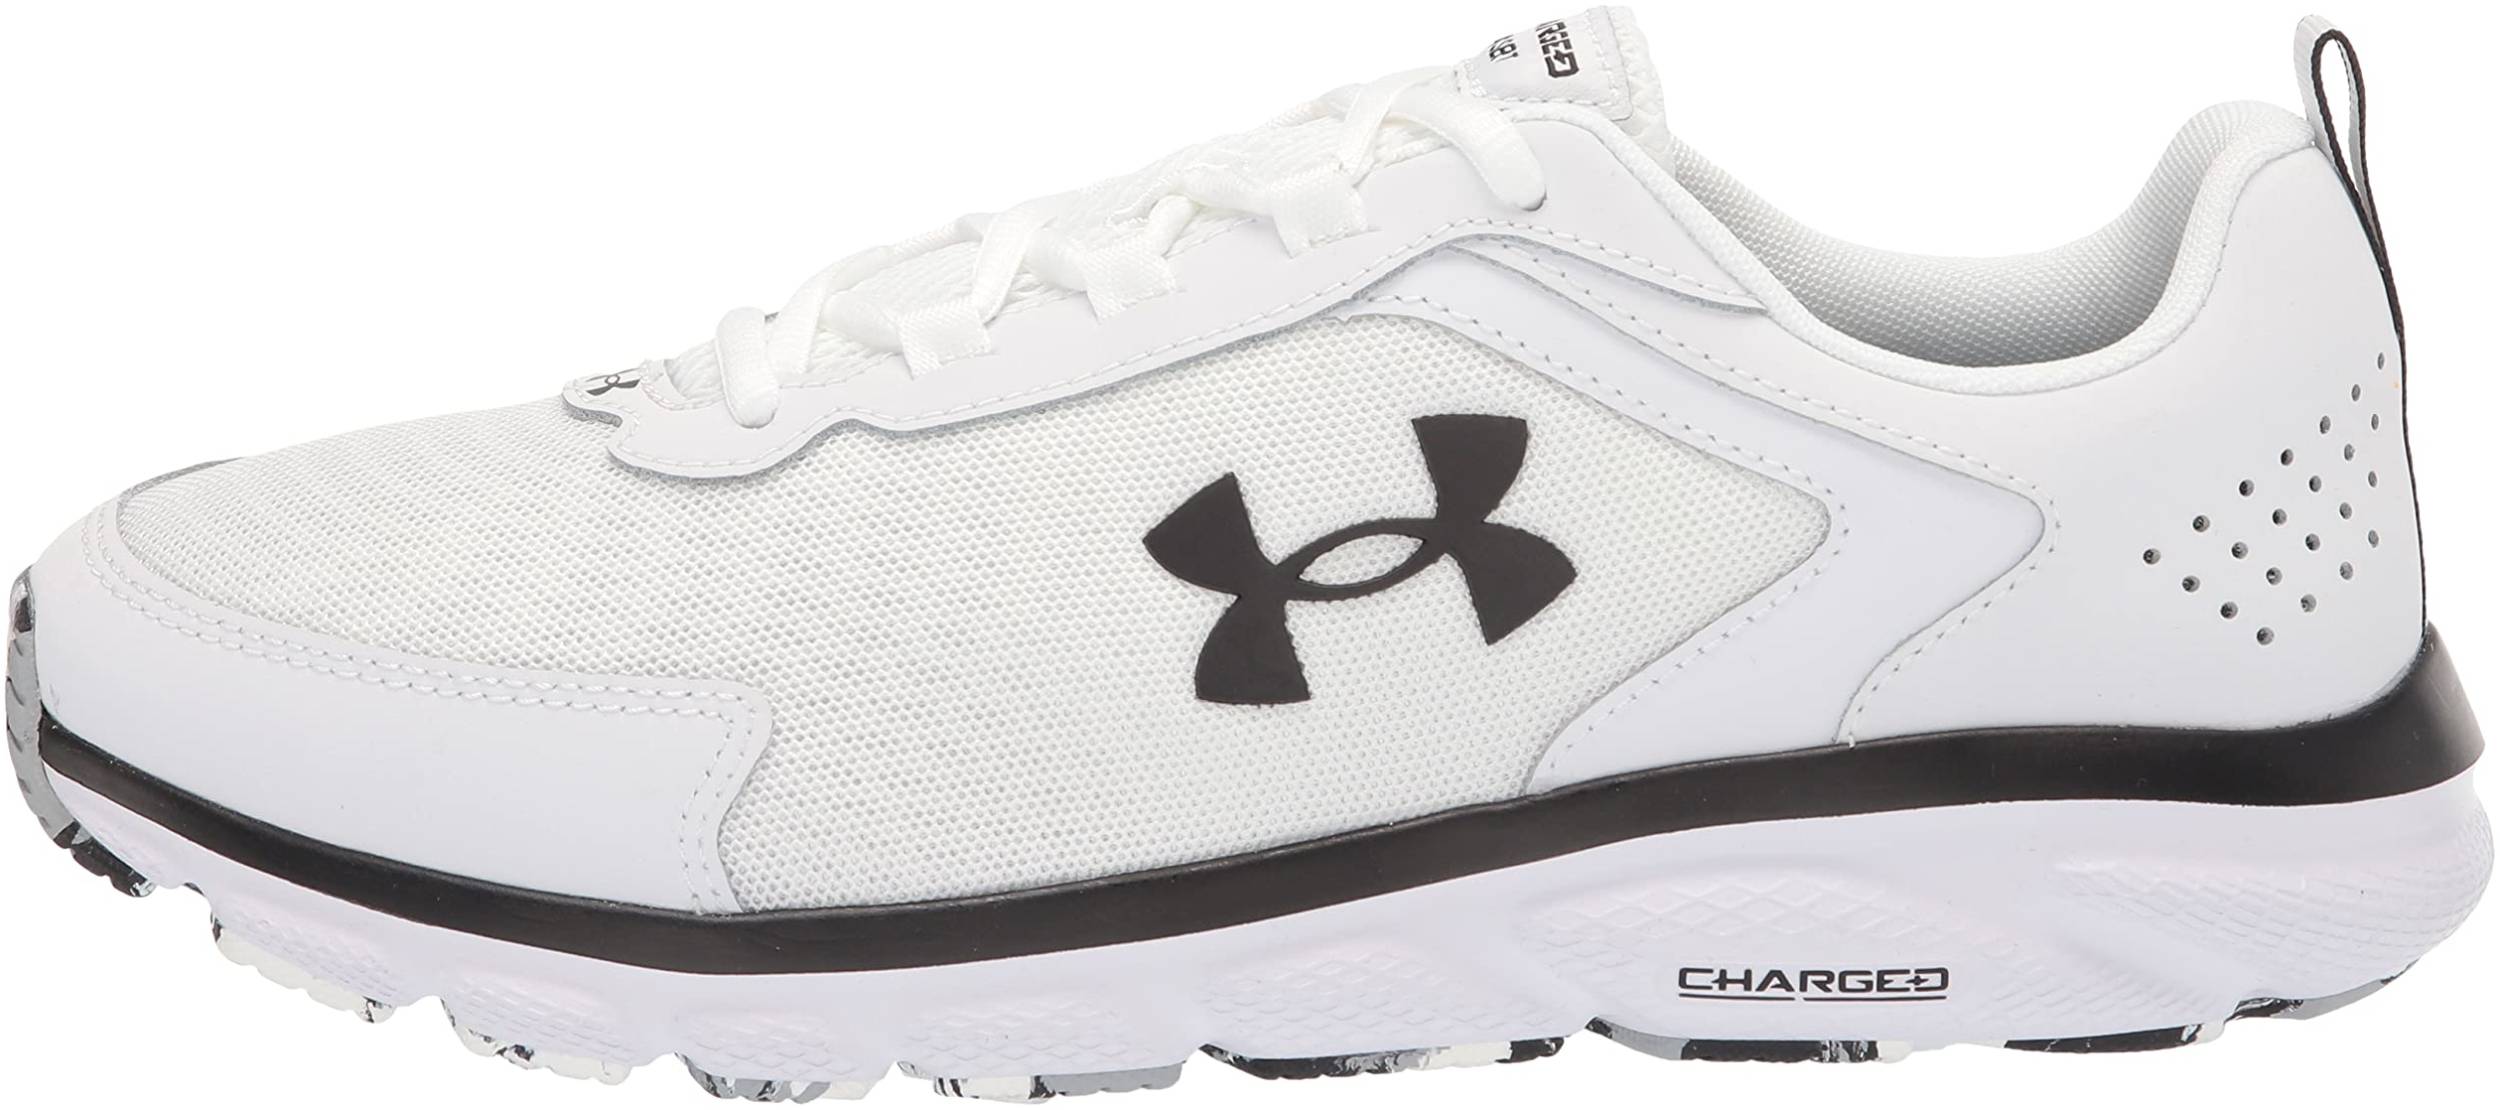 under armour shoes white